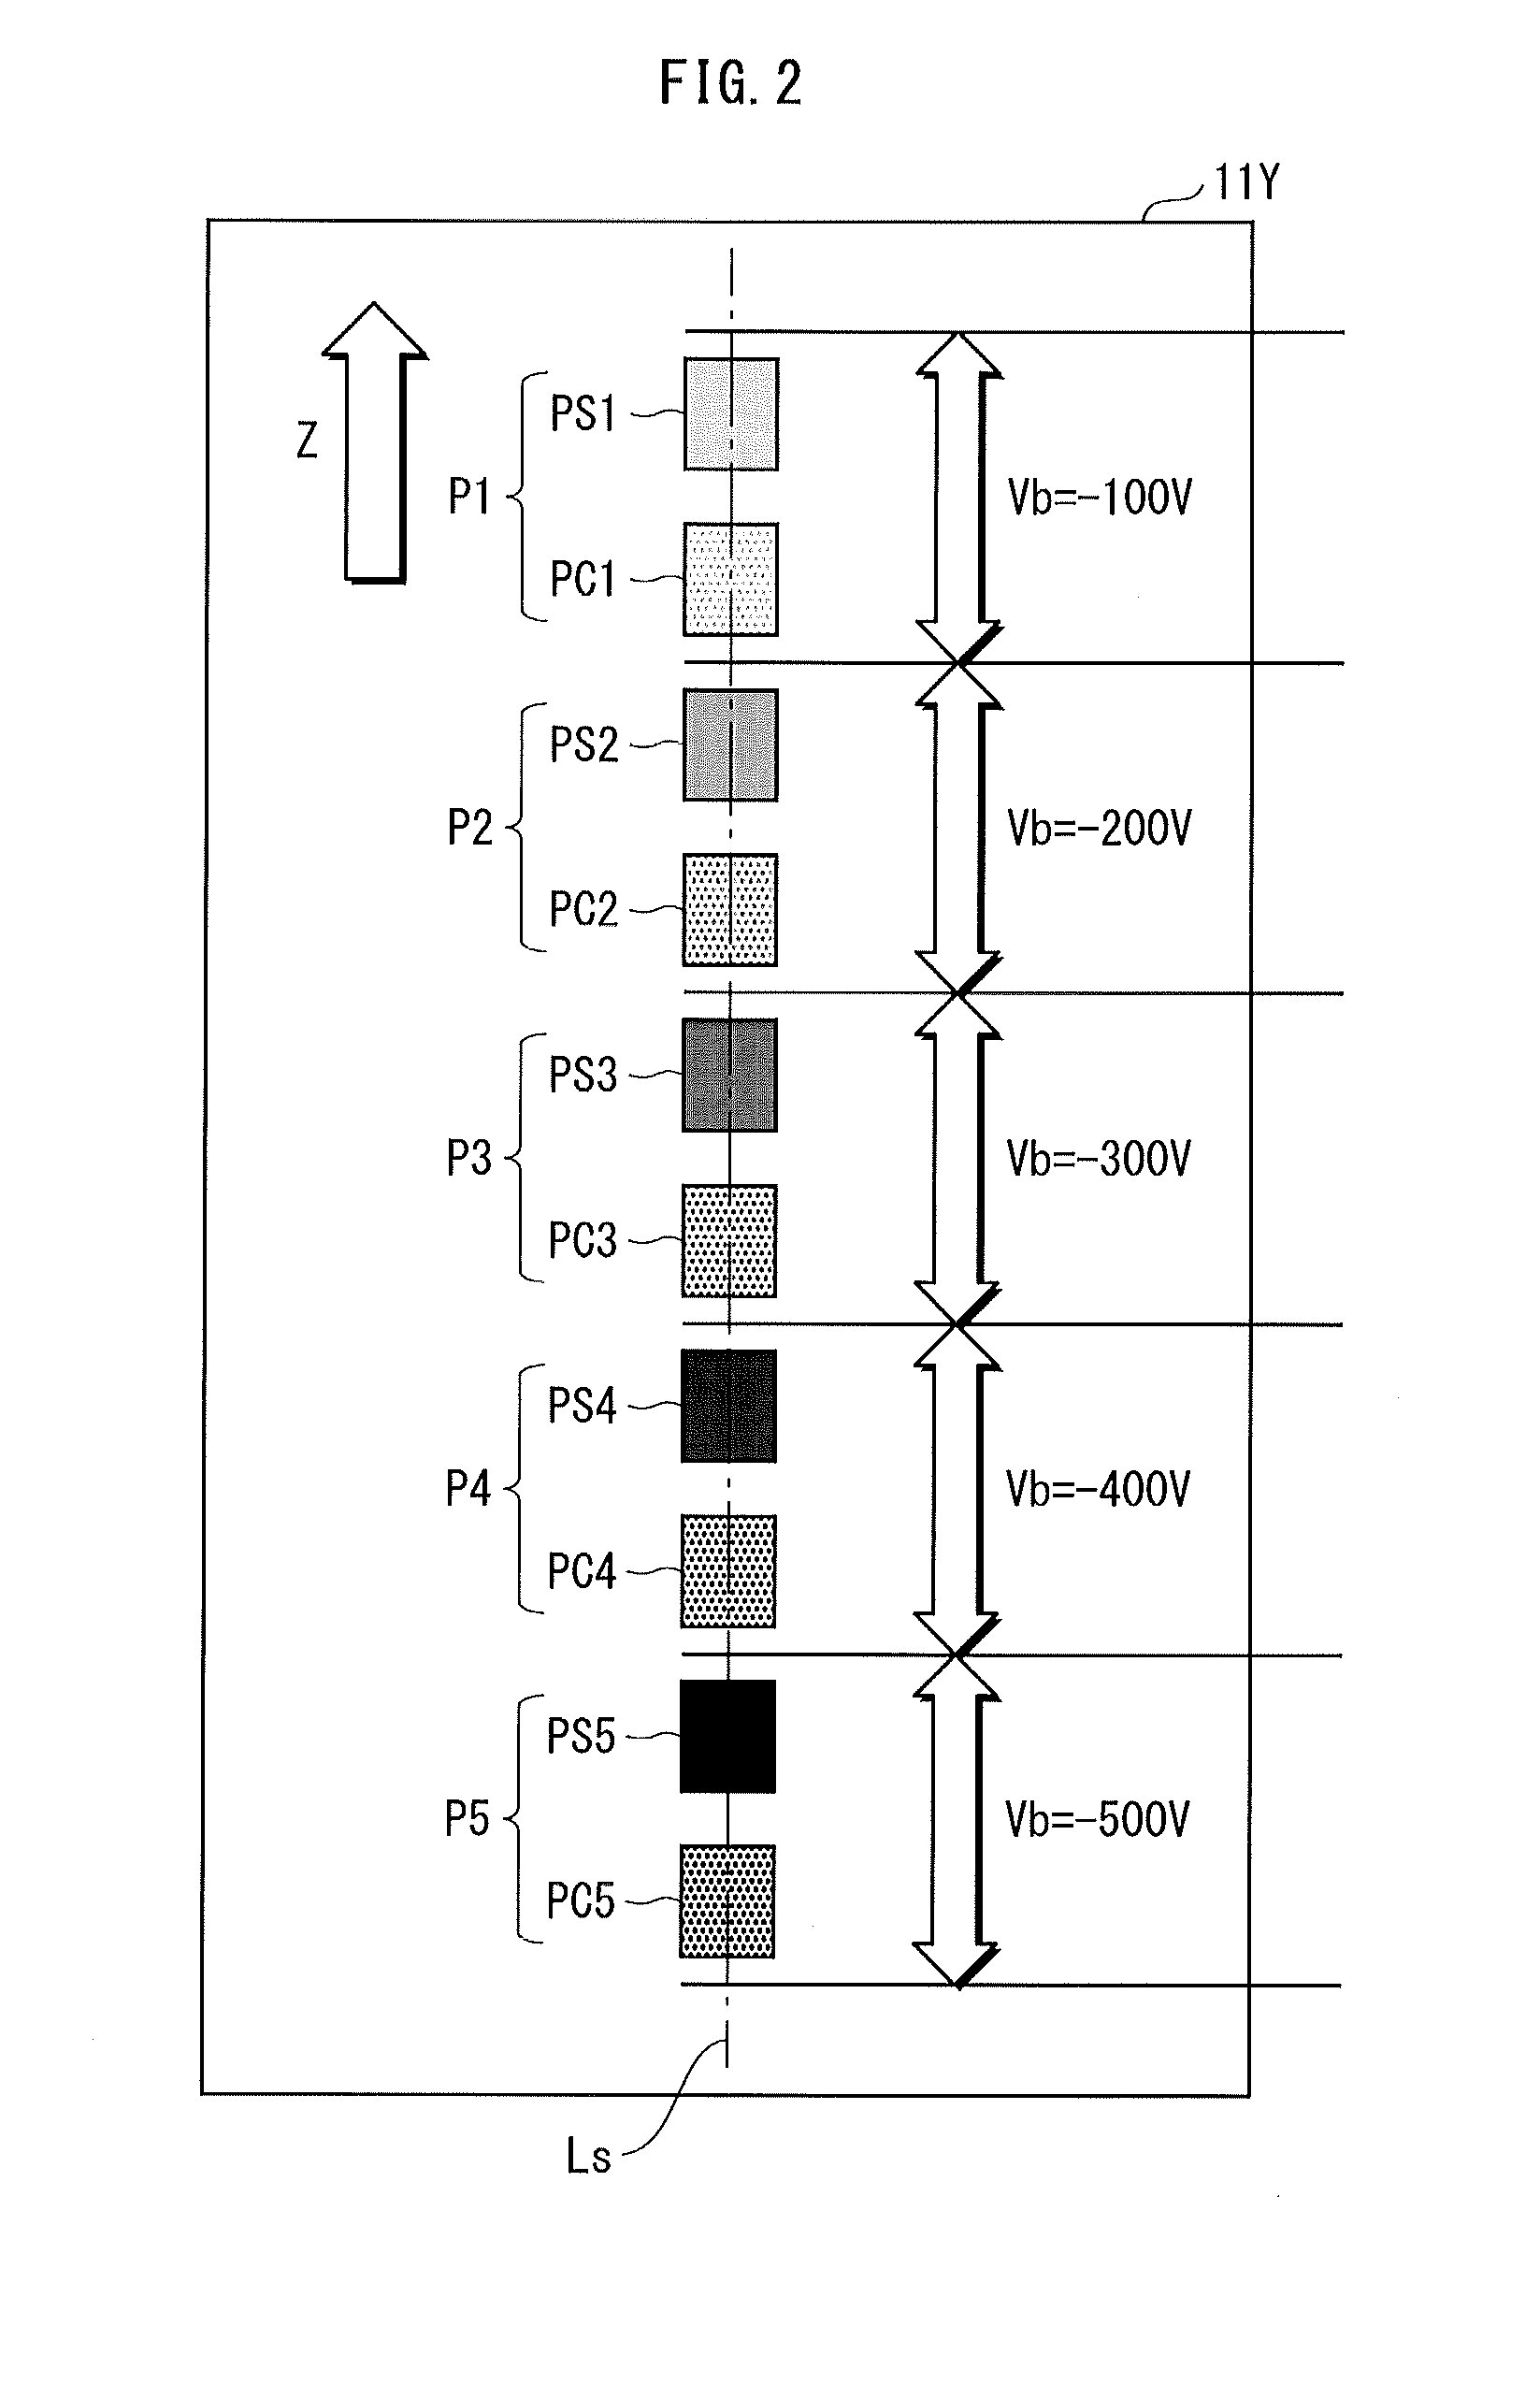 Image forming apparatus forming toner image on image carrier